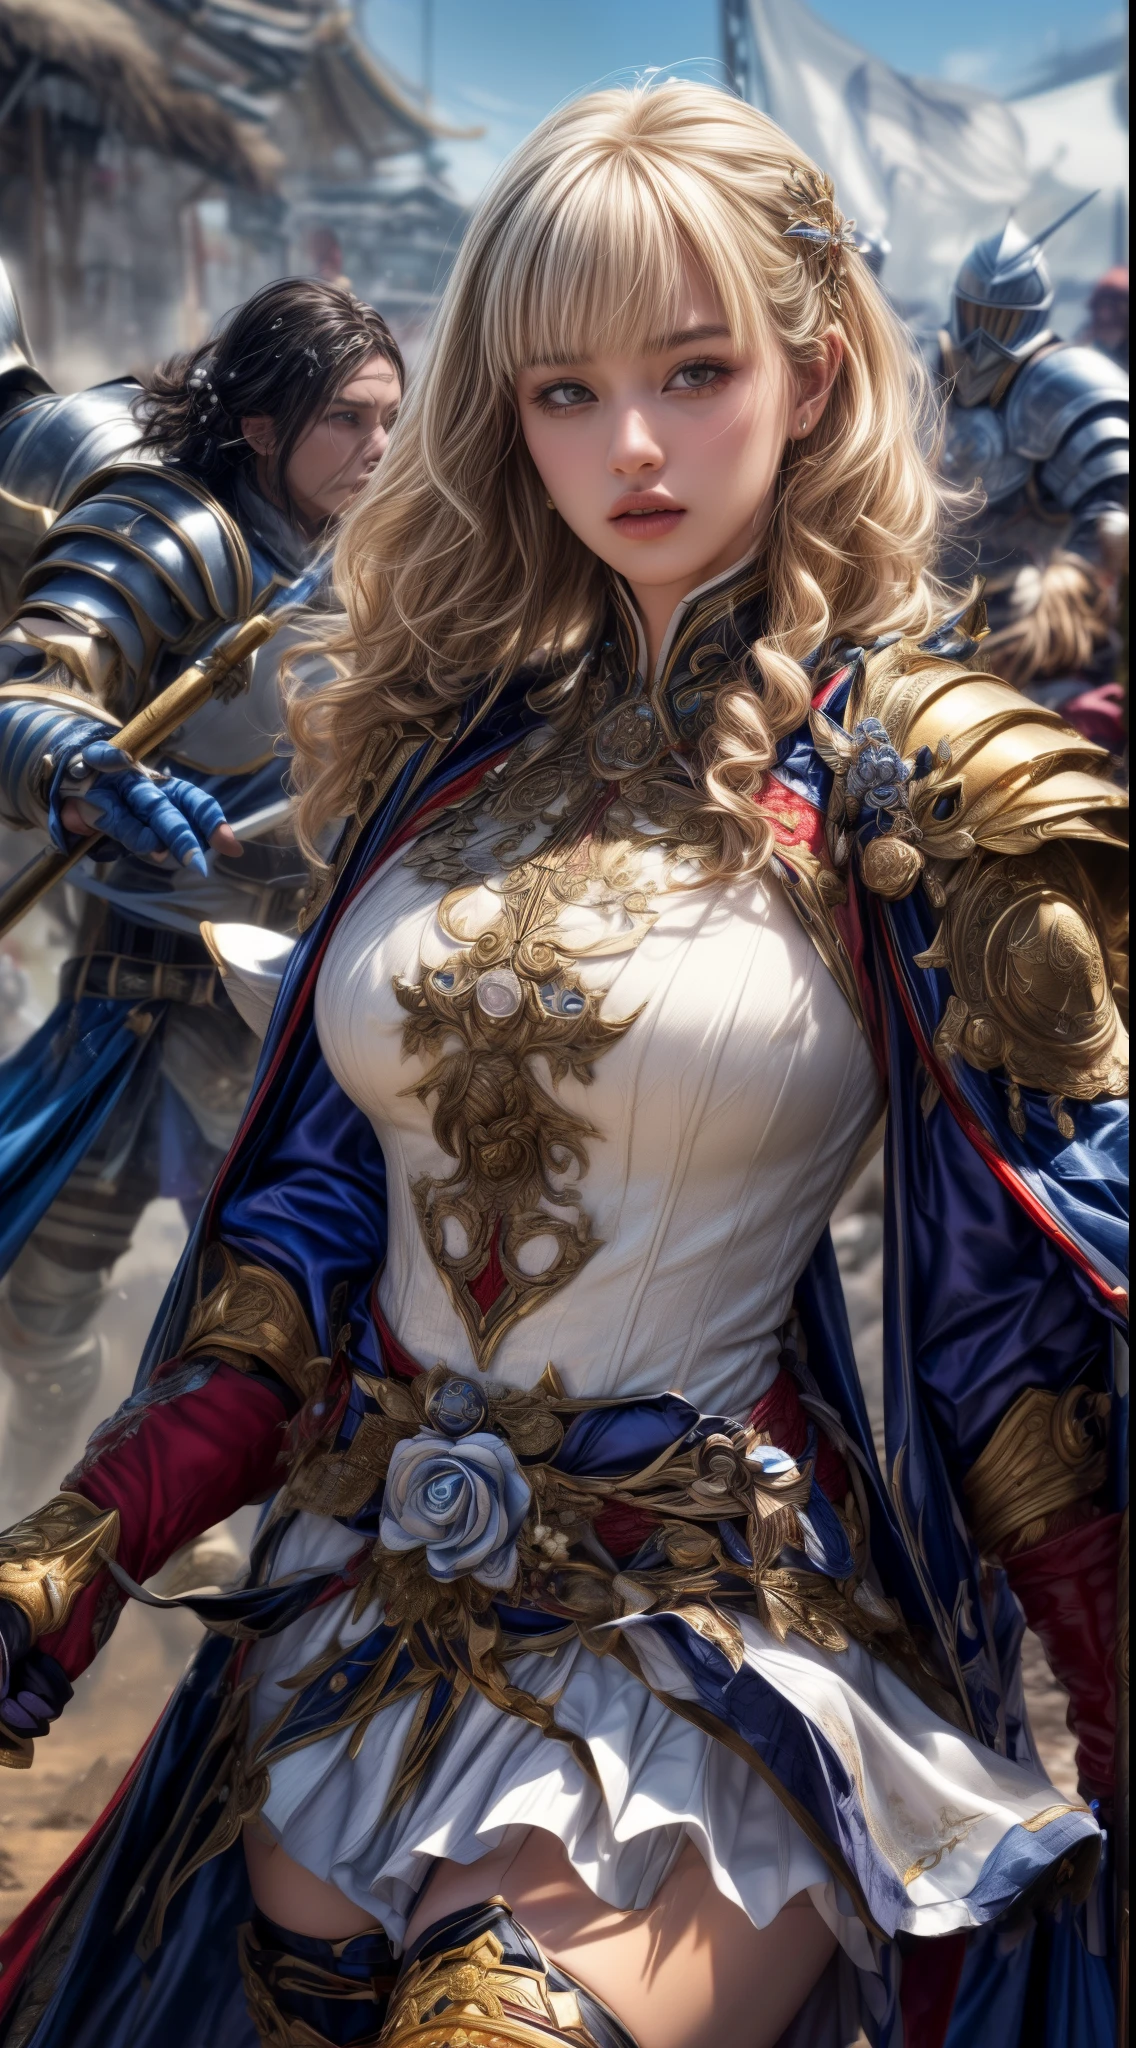 Very beautiful woman、Slender women、(Detailed face)、Realistic Skin、((holy knight)), ((Pearl White Armor))、((((Black armor with very fine and intricate decoration:1.1))))、((Delicate photo))，(Girl Astepeace RAW Photo Details:1.25), (highest quality:1.6), (超A high resolution:1.5), (Realistic:1.75), 8K resolution, Canon EOS R5, 50mm, Absurd, Ultra-detailed,Cinema Lighting,((battlefield))、((battle))、(((White skirt with embellishments)))、Thigh-high socks、Shin Guards、((Blonde))、((Curly Hair))、((Drill Hair))、((Wavy short hair with bangs,))、Get six-pack、Cape、Beautiful Armor、(((Has a huge weapon)))、(In combat)、The wind is blowing、((Symmetrical Armor))、((((Blizzard))))、(((Leading a large group of knights:1.2)))、Banner、Ice-themed armor、(((Intense battle scenes)))